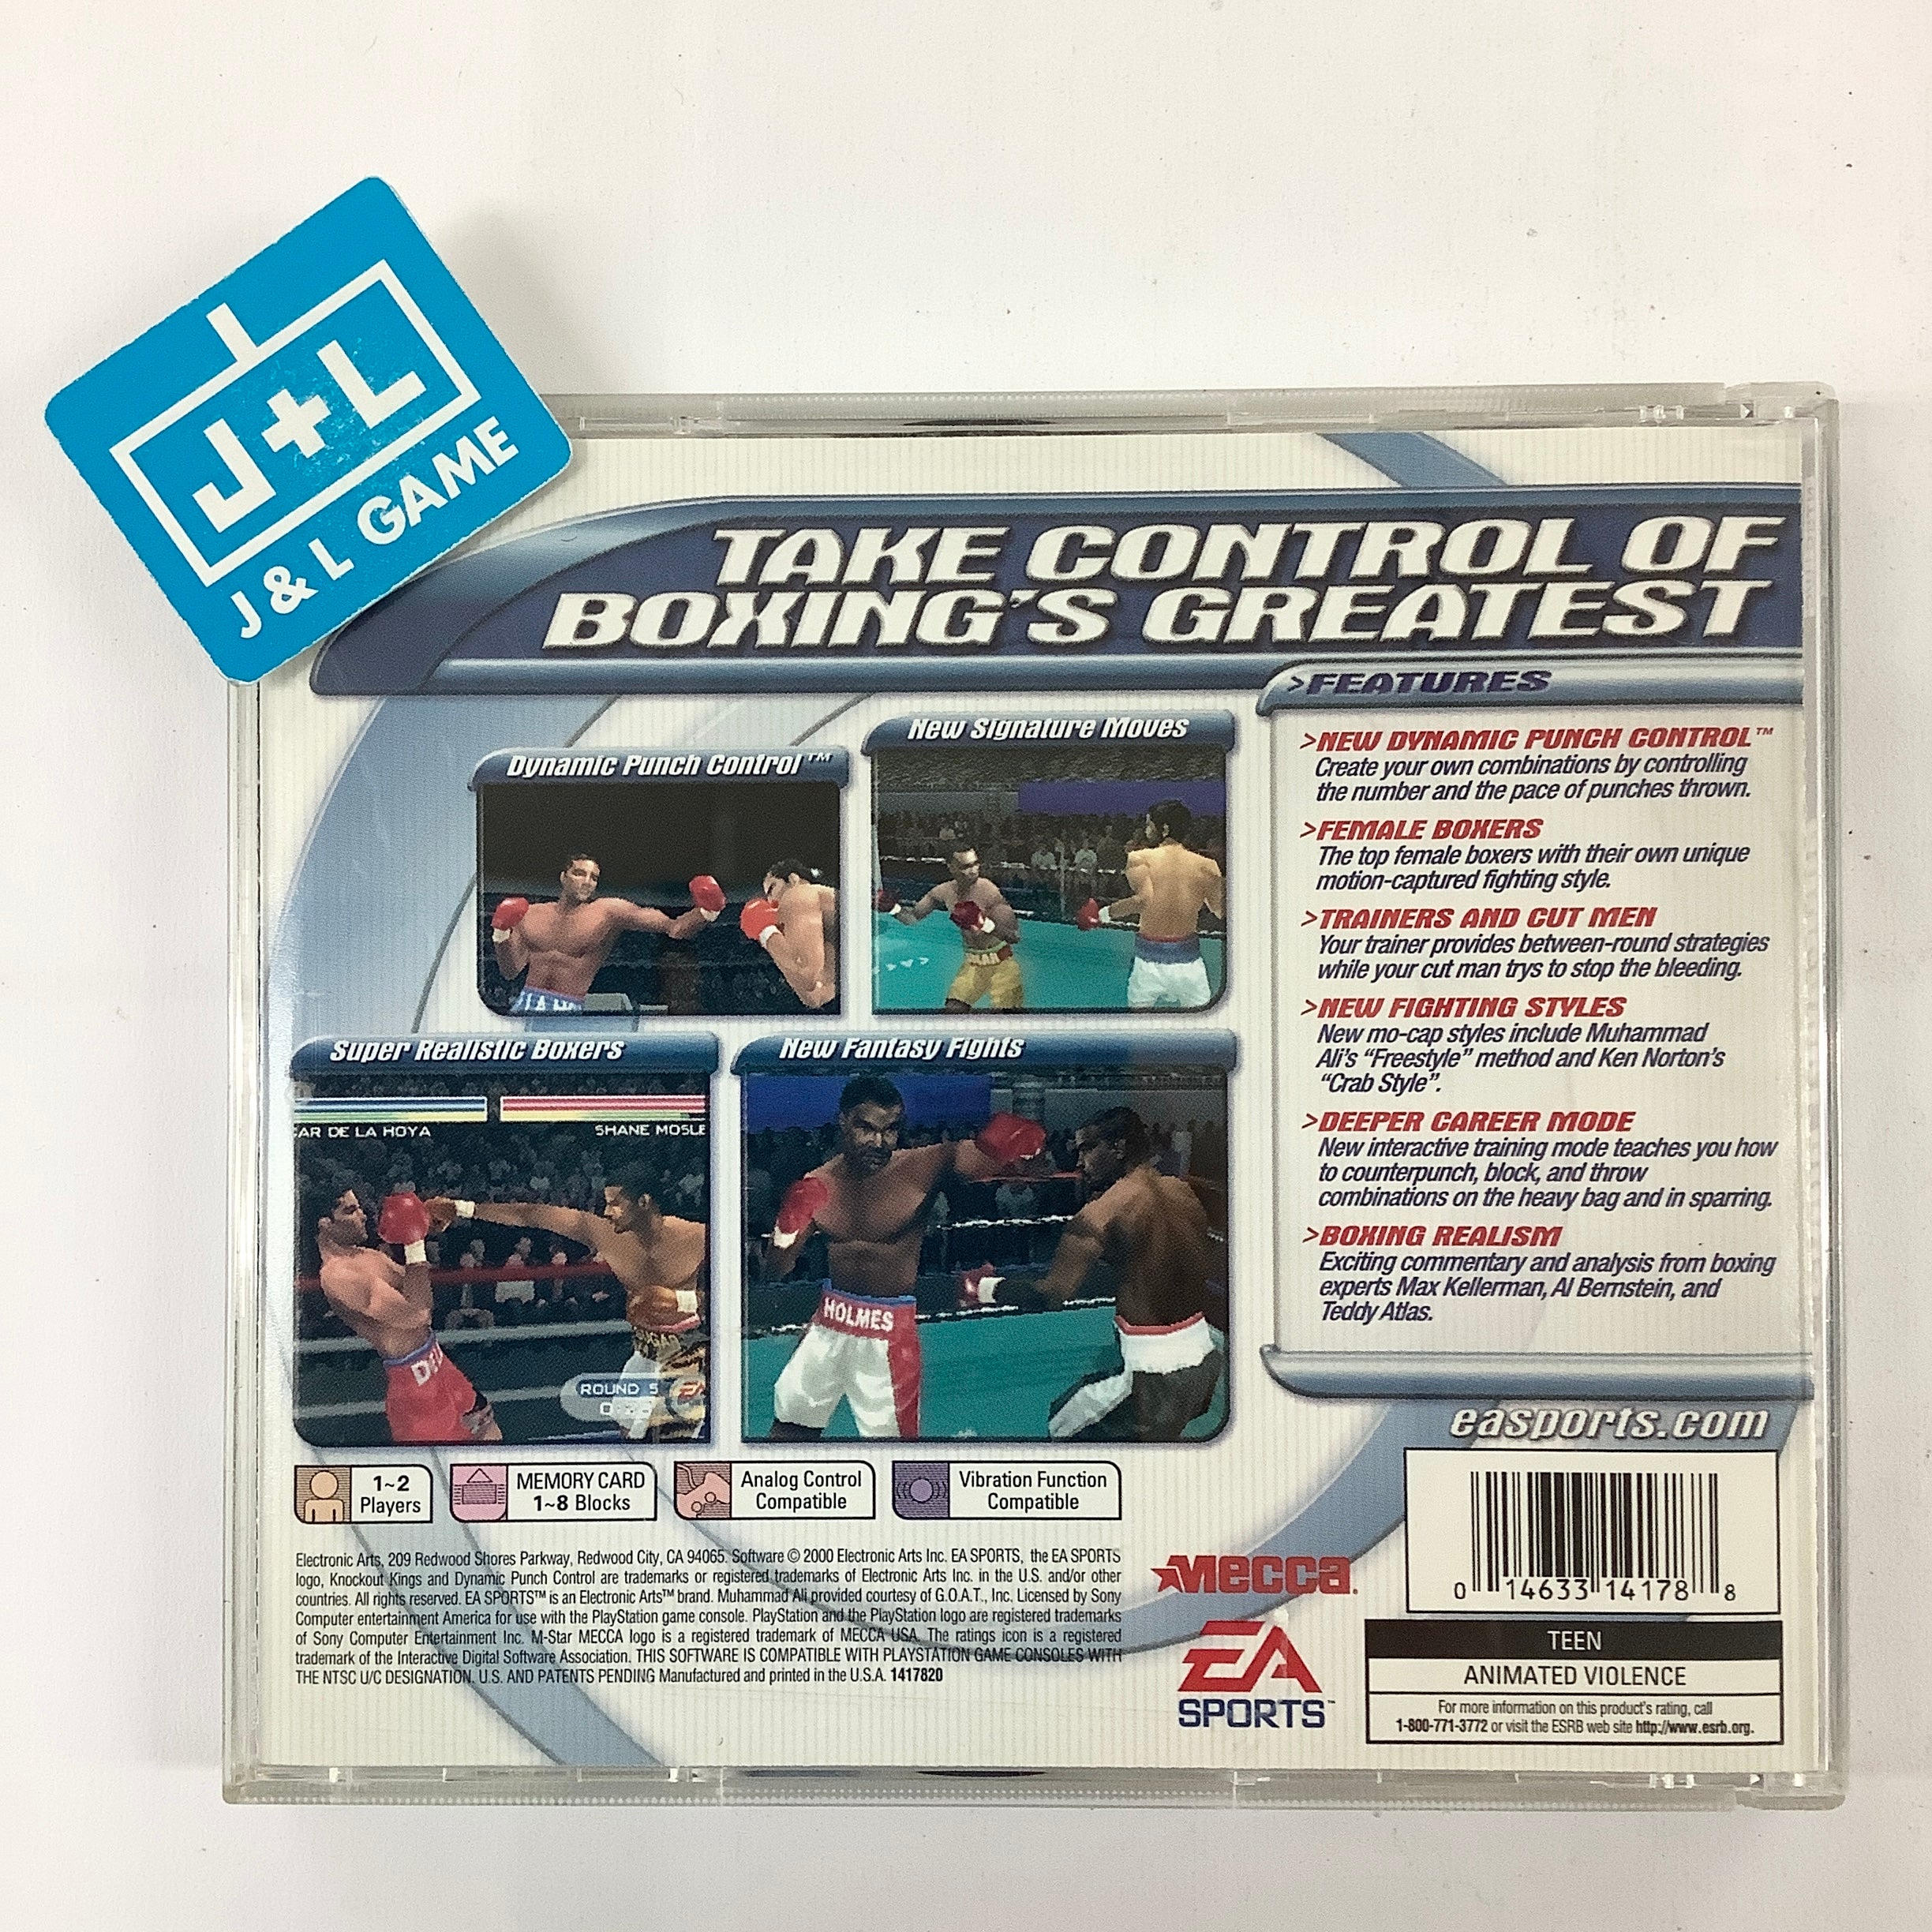 Knockout Kings 2001 - (PS1) PlayStation 1 [Pre-Owned] Video Games EA Sports   